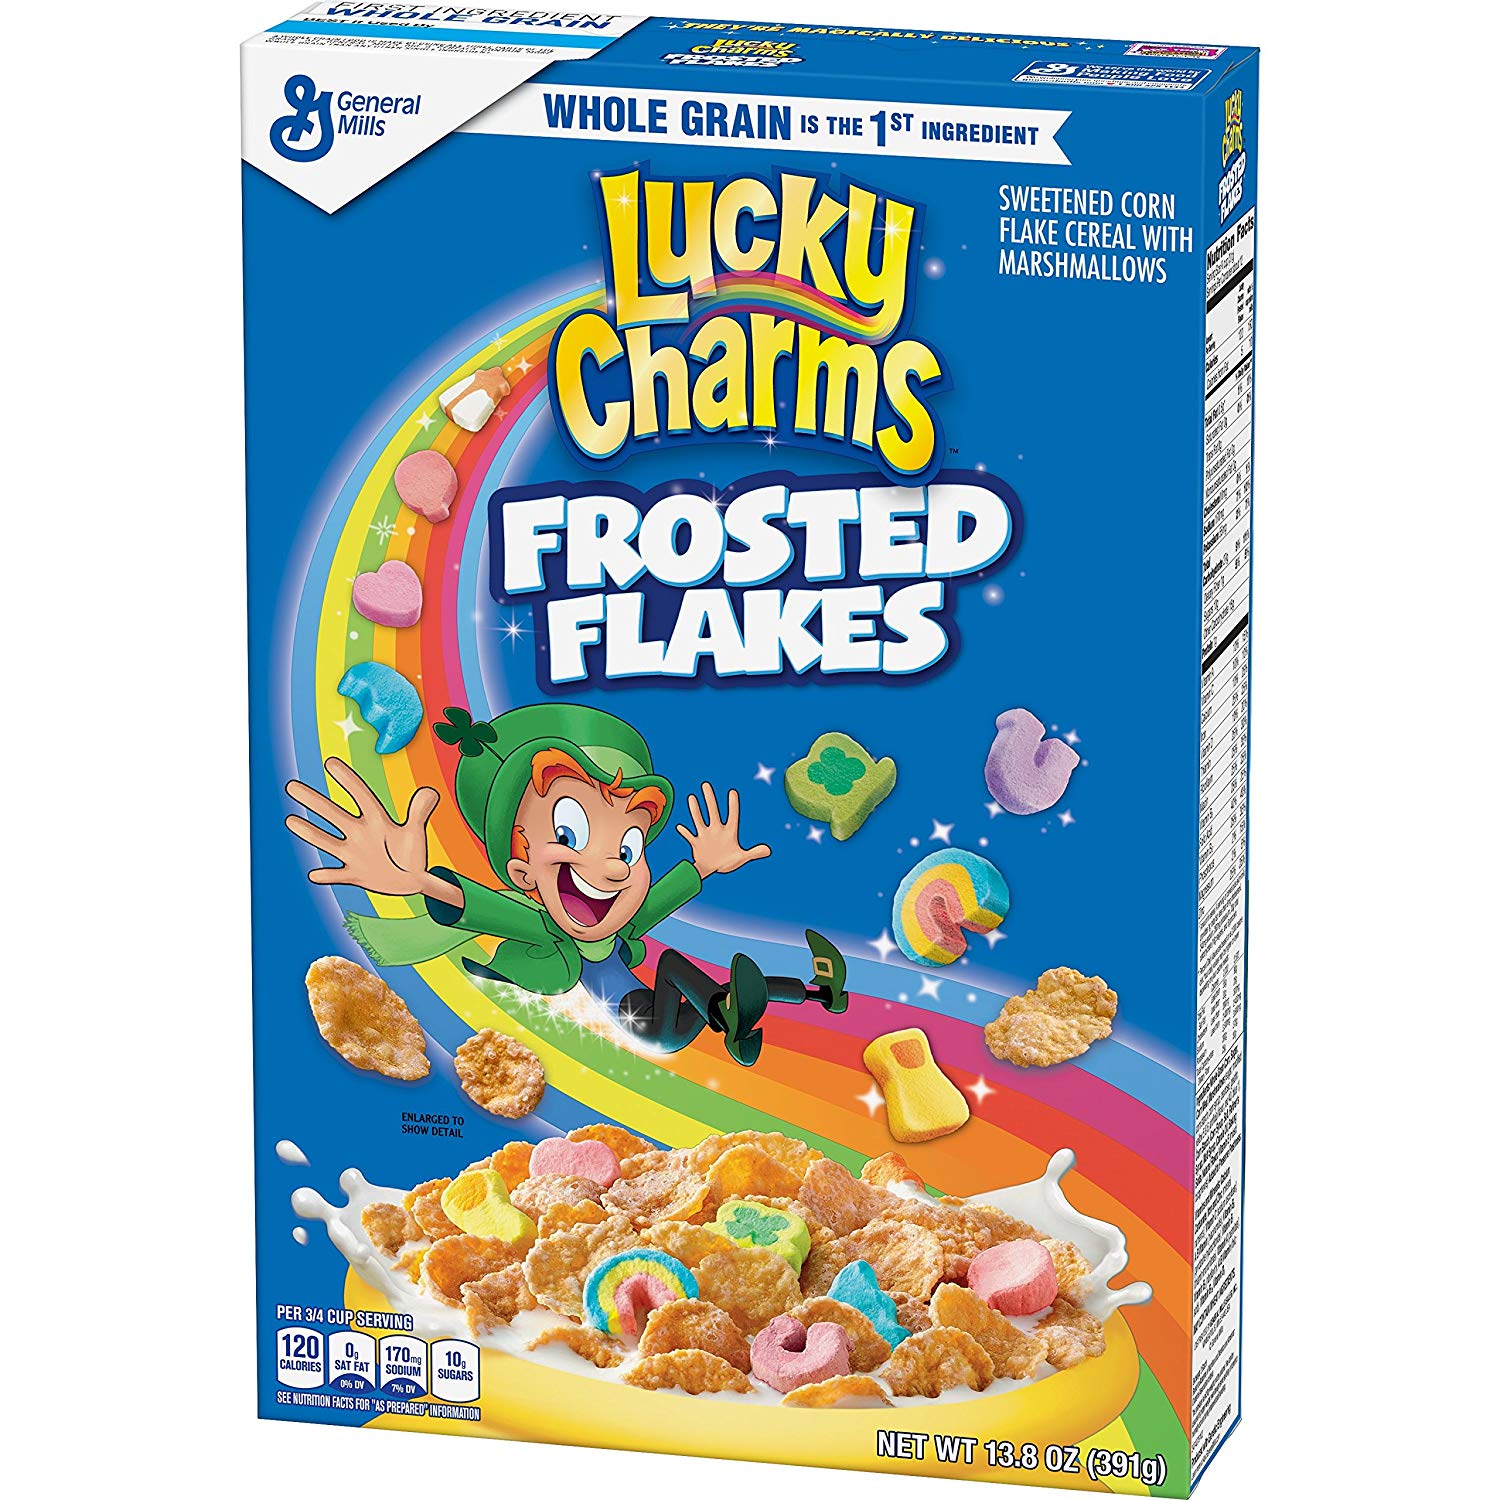 Lucky Charms Frosted Flakes, Marshmallow Cereal, Whole Grain, Unicorns, 13.8 oz